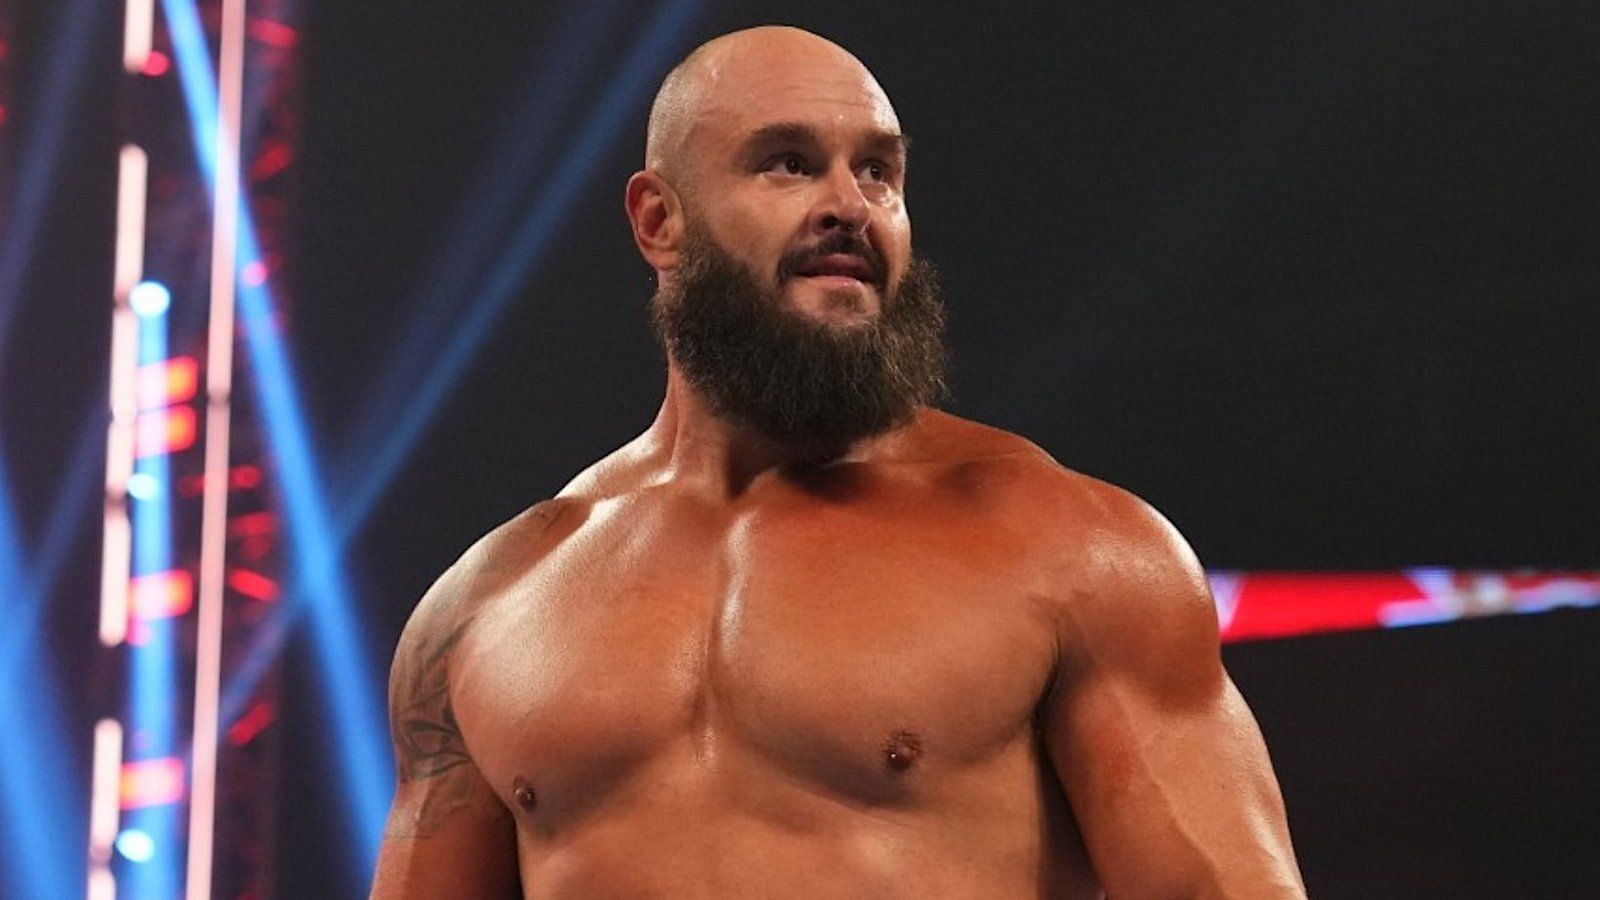 Strowman is a physical Superstar.